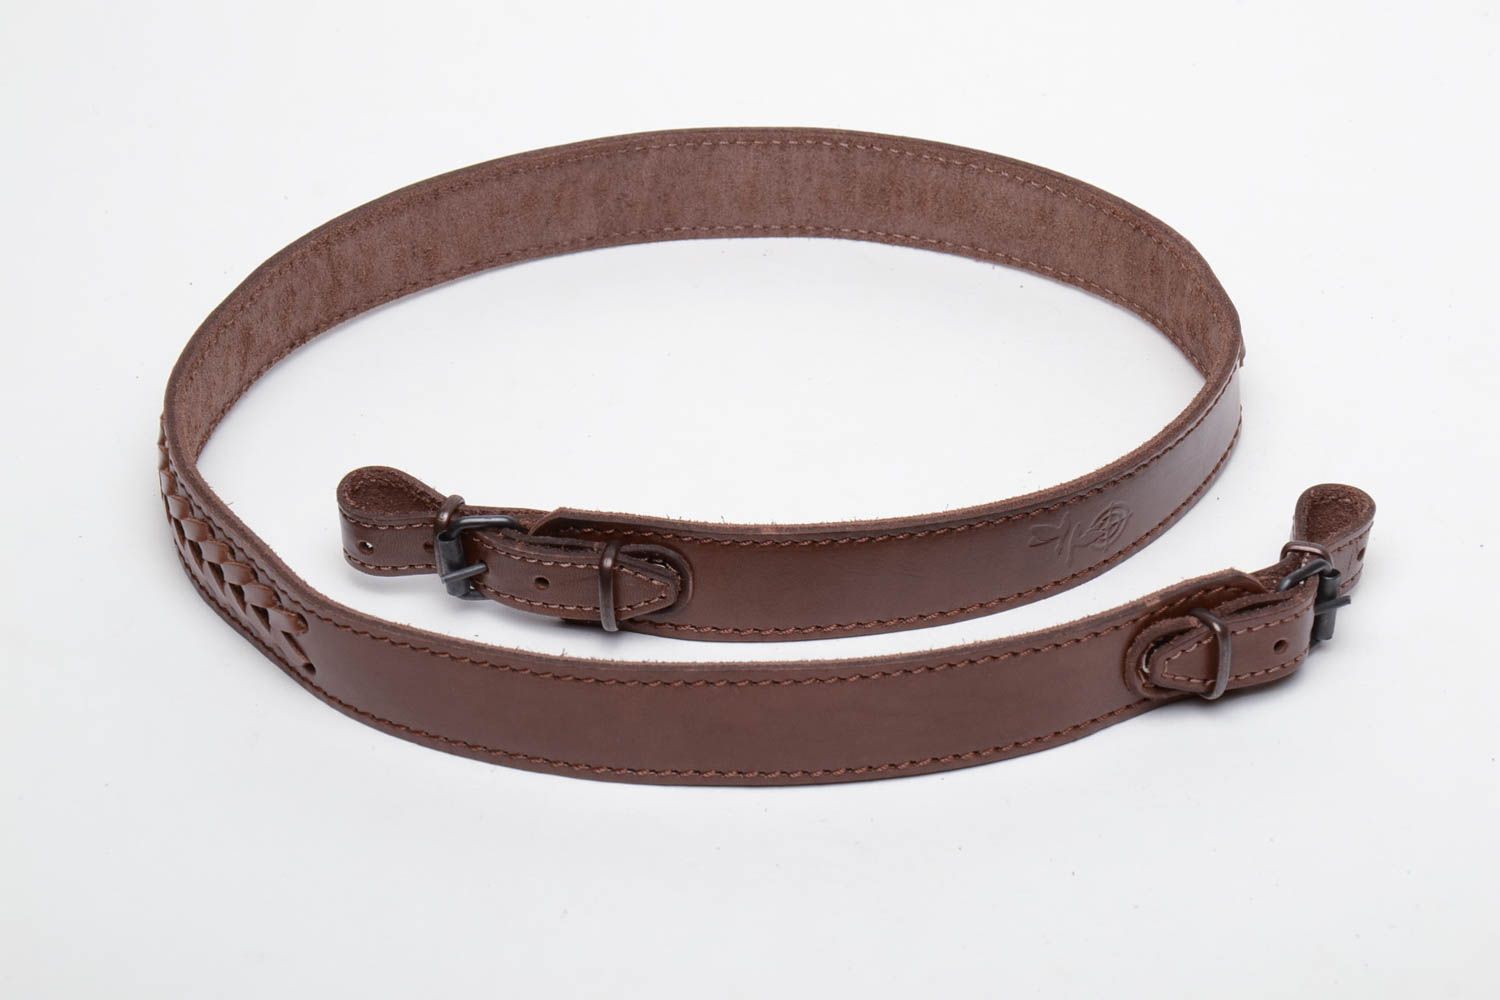 Woven leather rifle sling photo 2